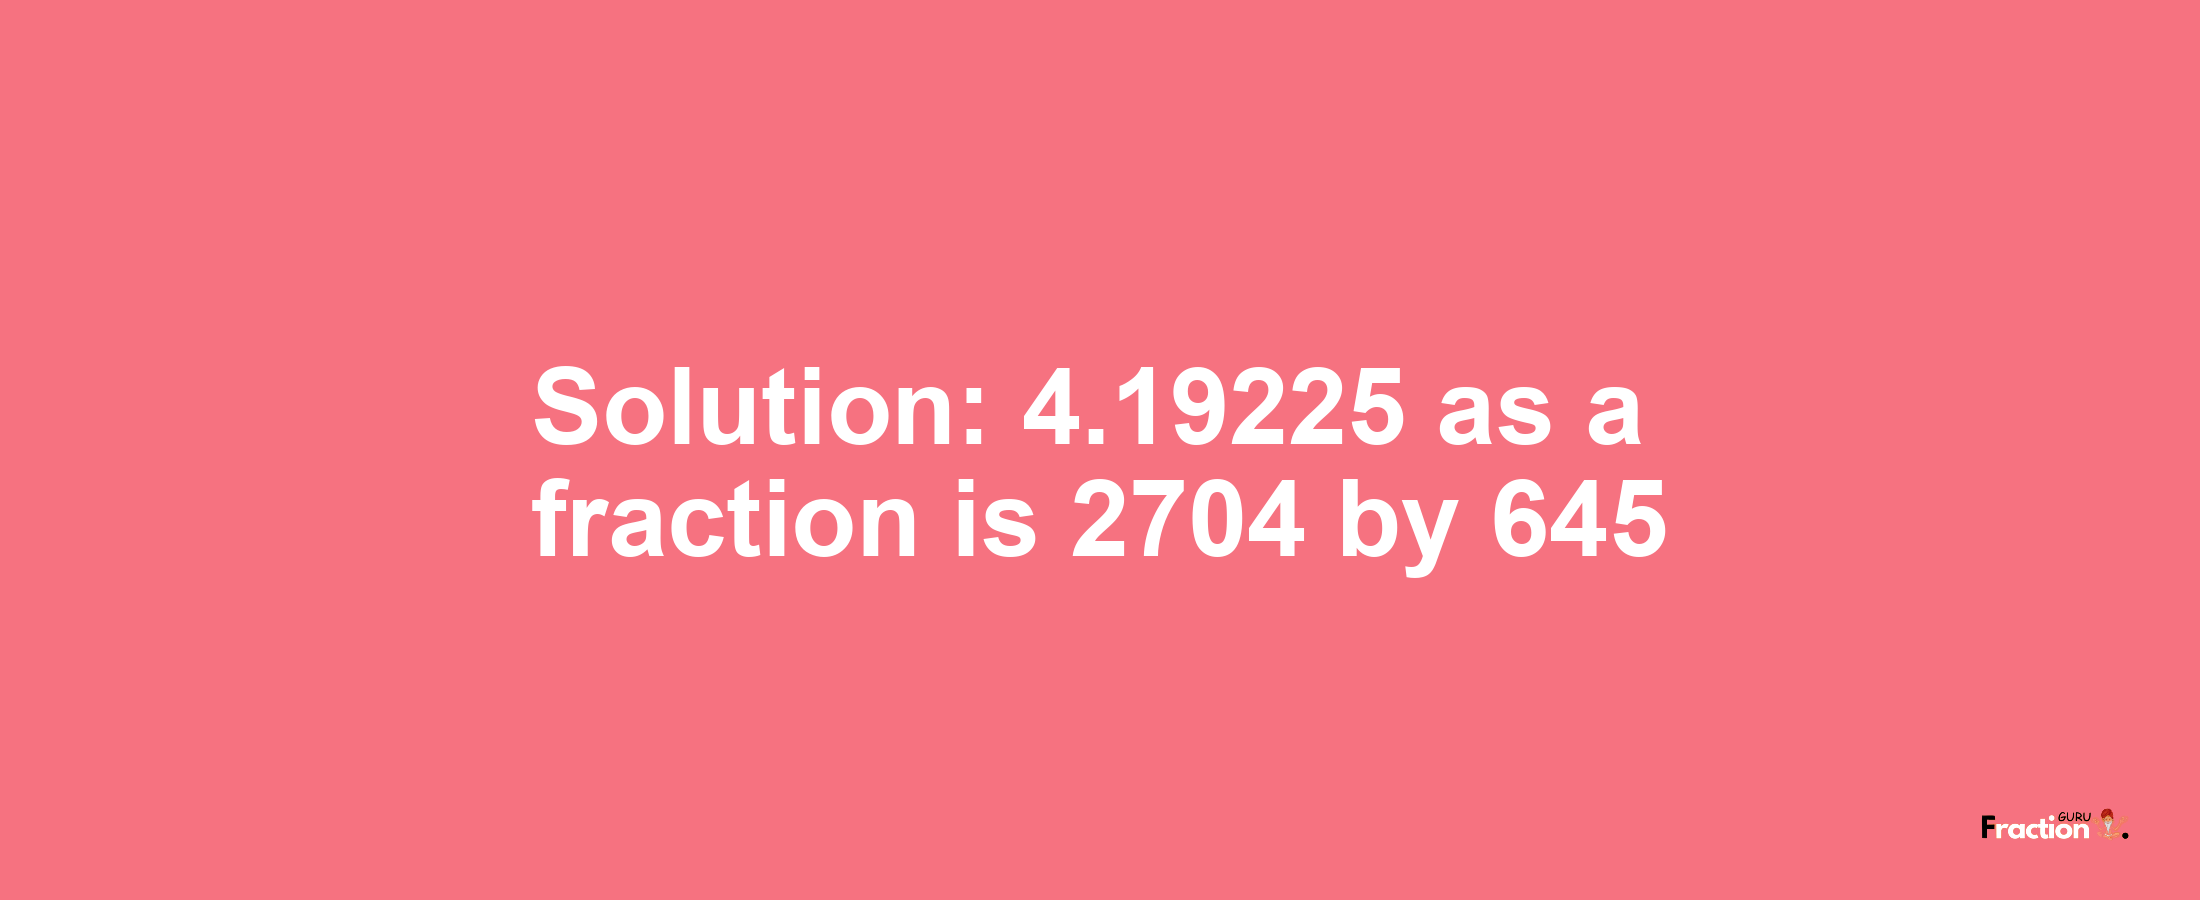 Solution:4.19225 as a fraction is 2704/645